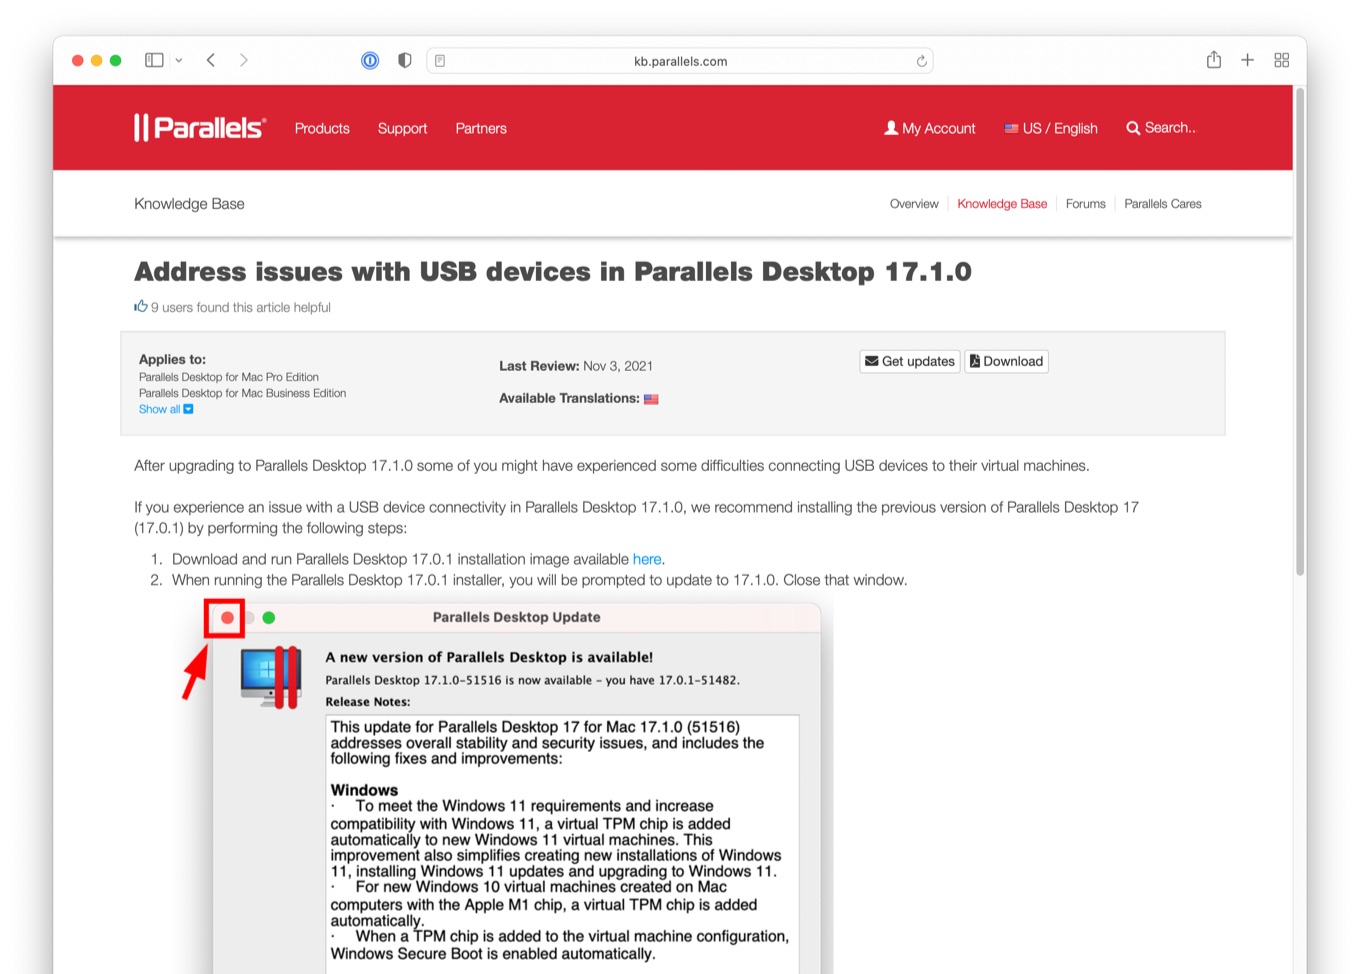 Address issues with USB devices in Parallels Desktop 17.1.0